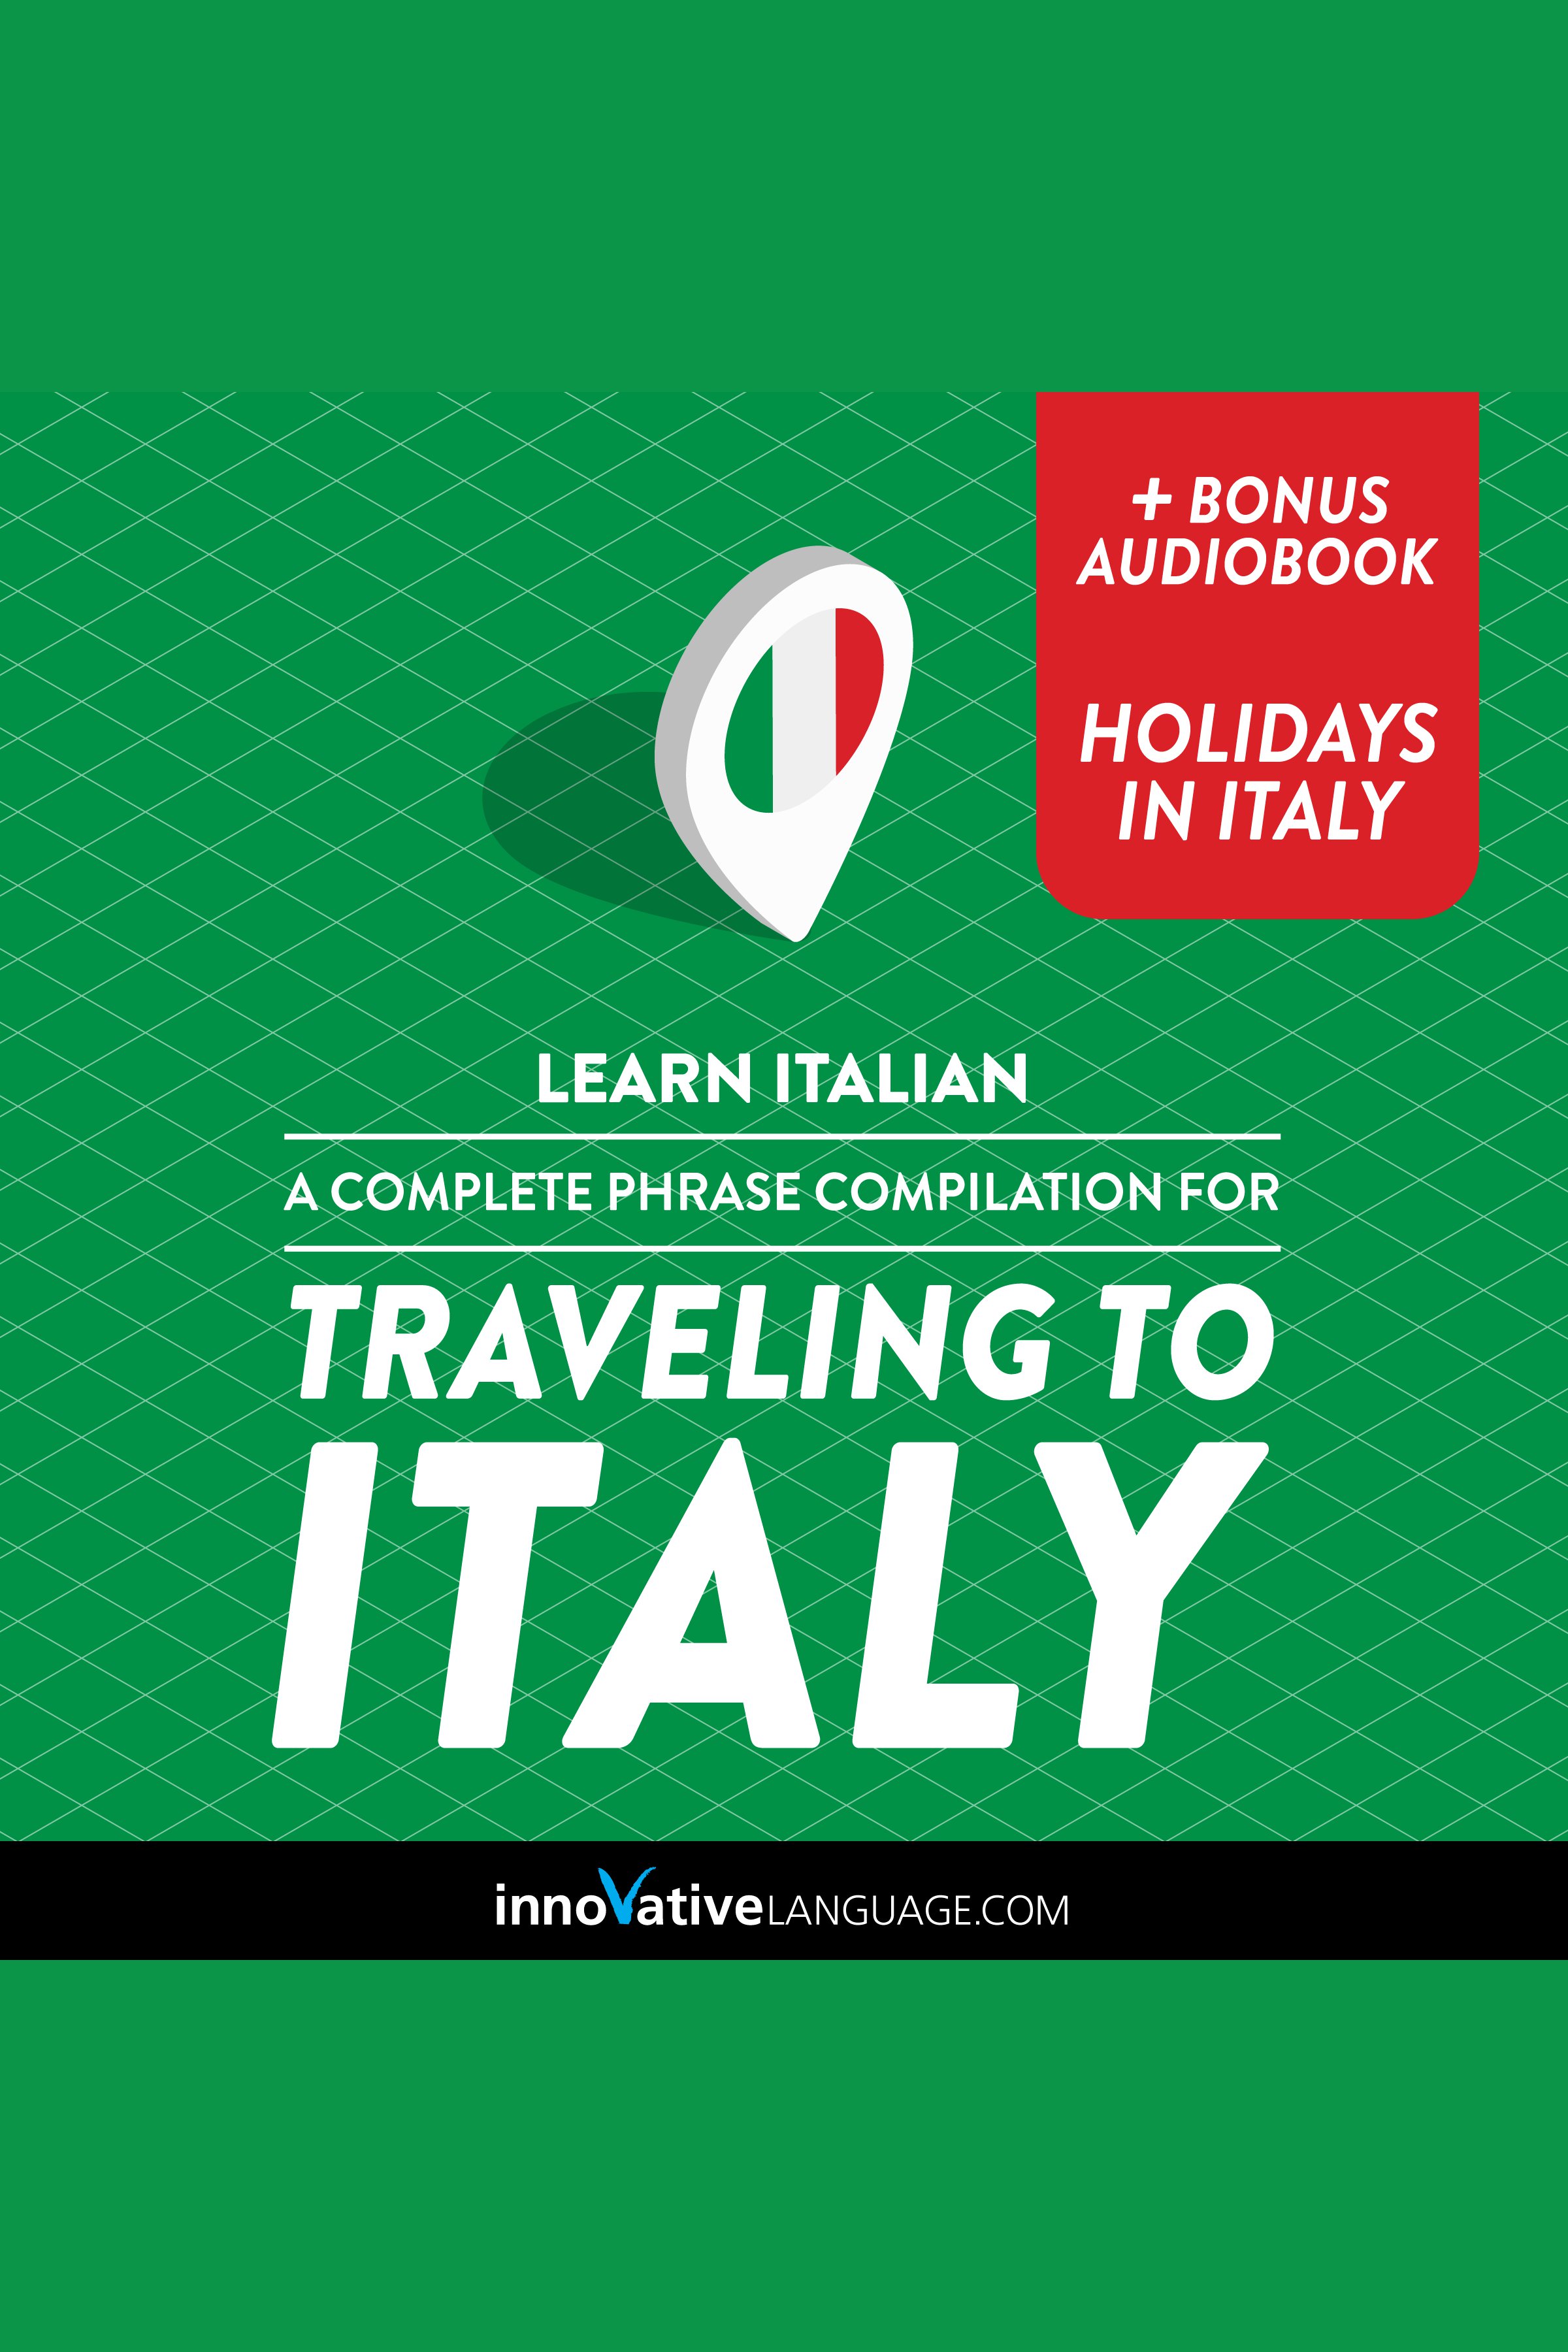 Learn Italian: A Complete Phrase Compilation for Traveling to Italy cover image